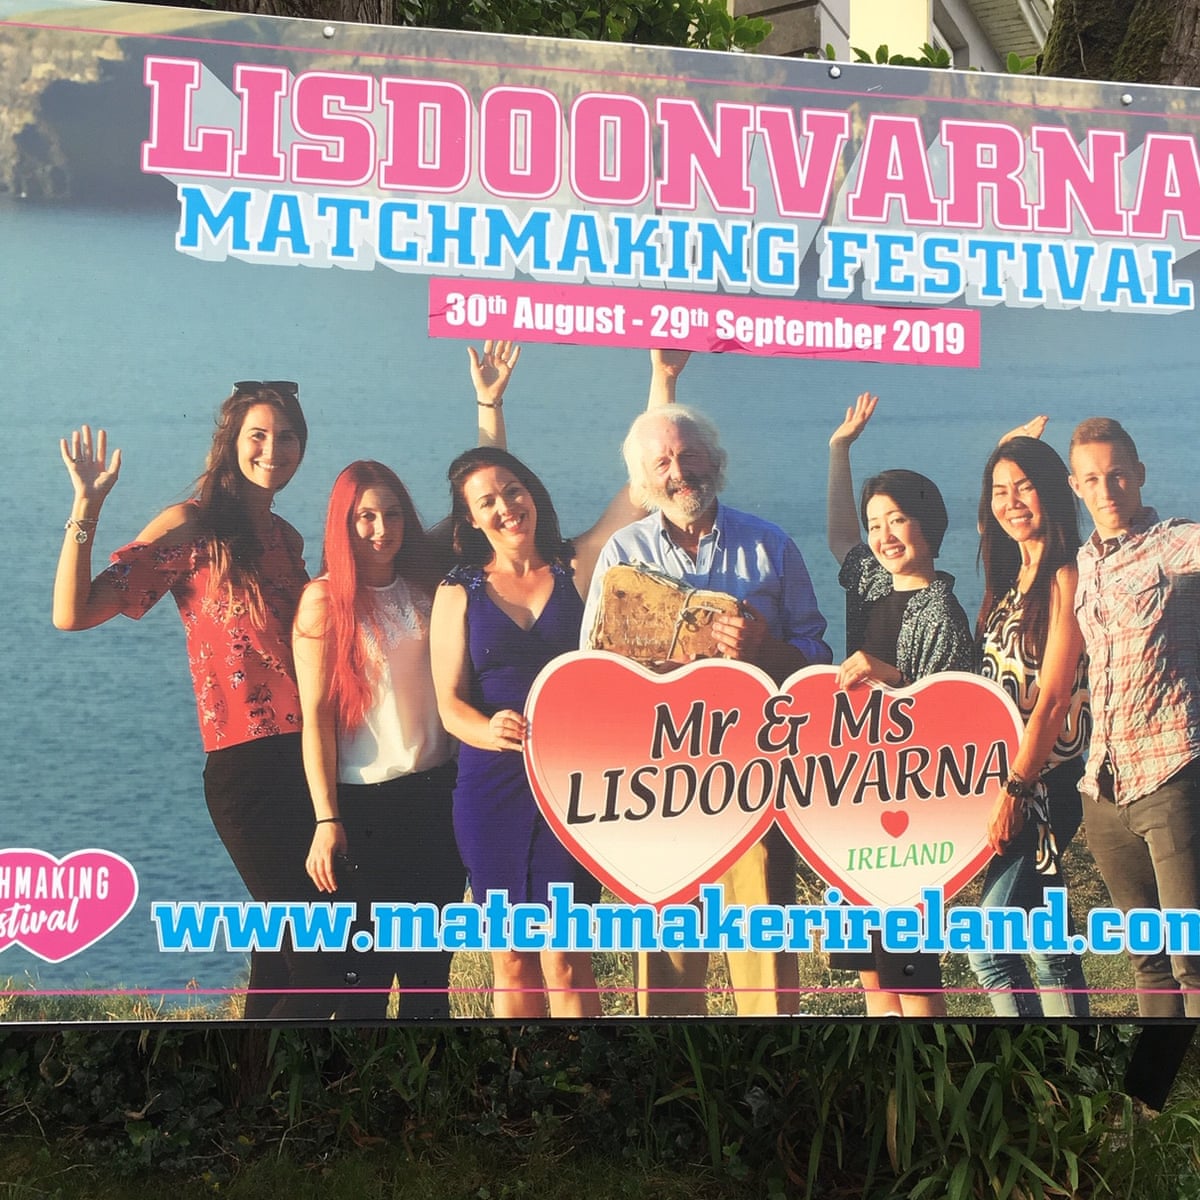 About us | Matchmaking Festival